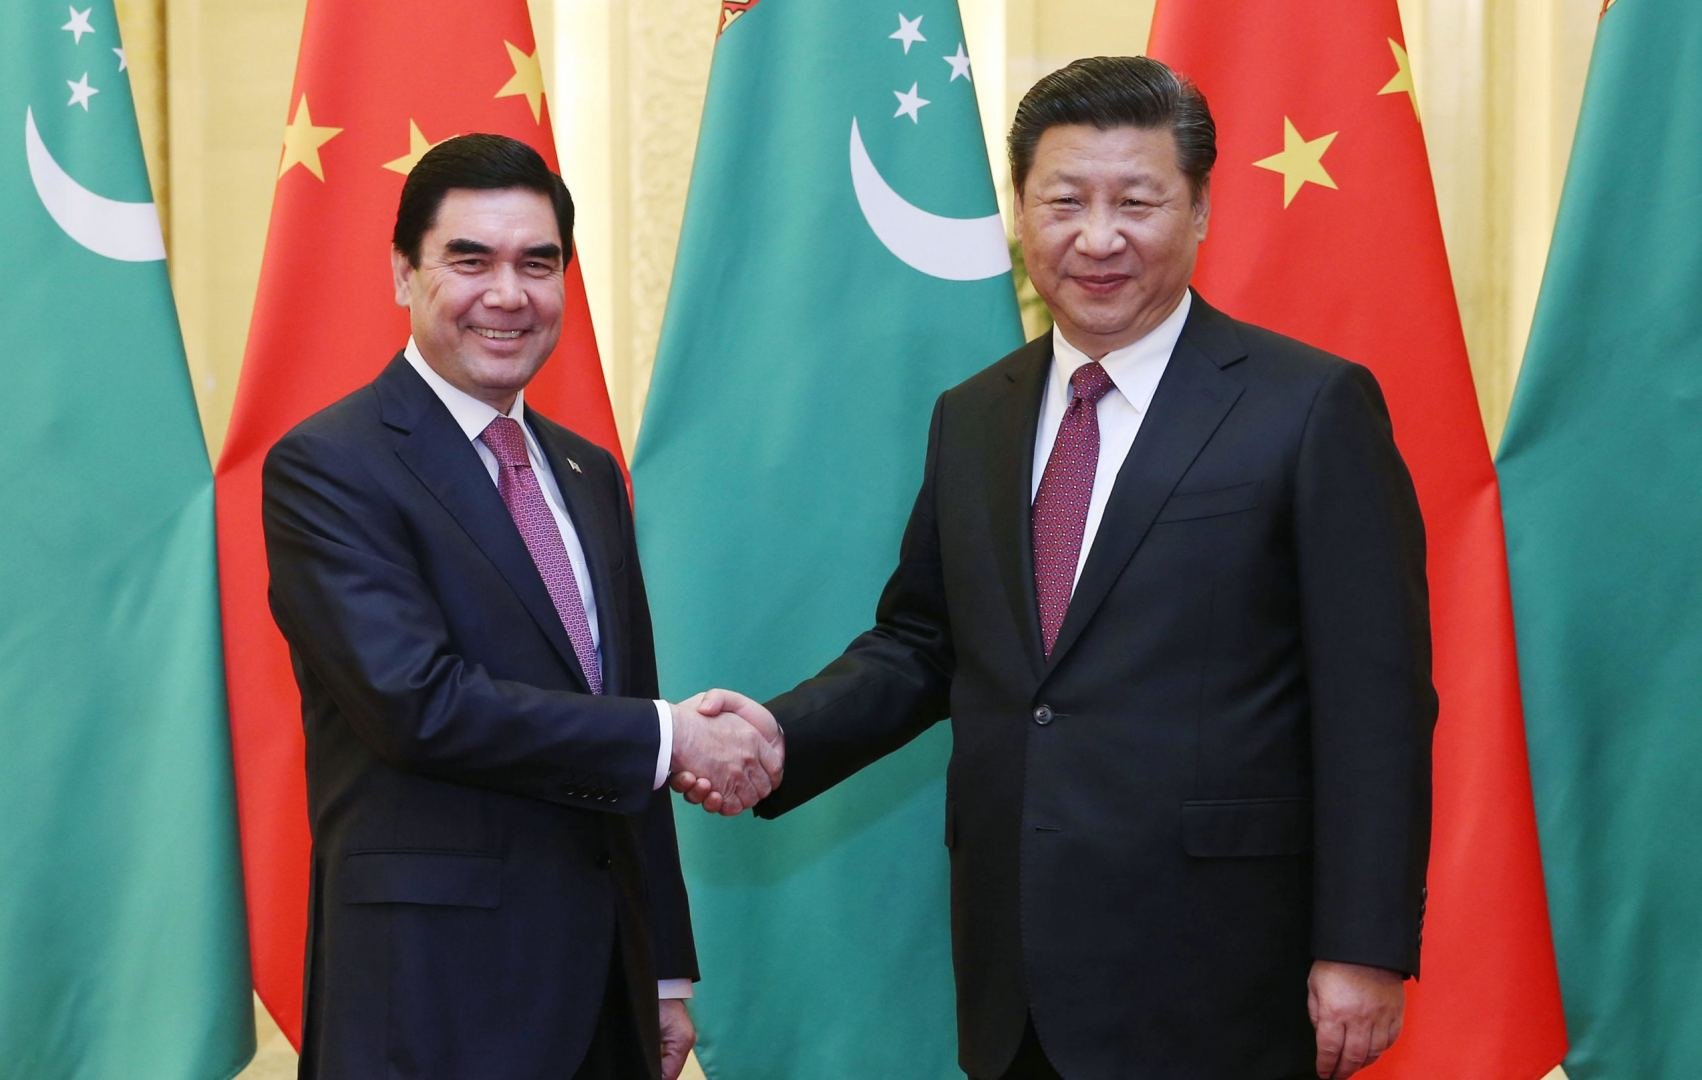 Chinese, Turkmen presidents exchange congratulations on 30th anniversary of diplomatic ties